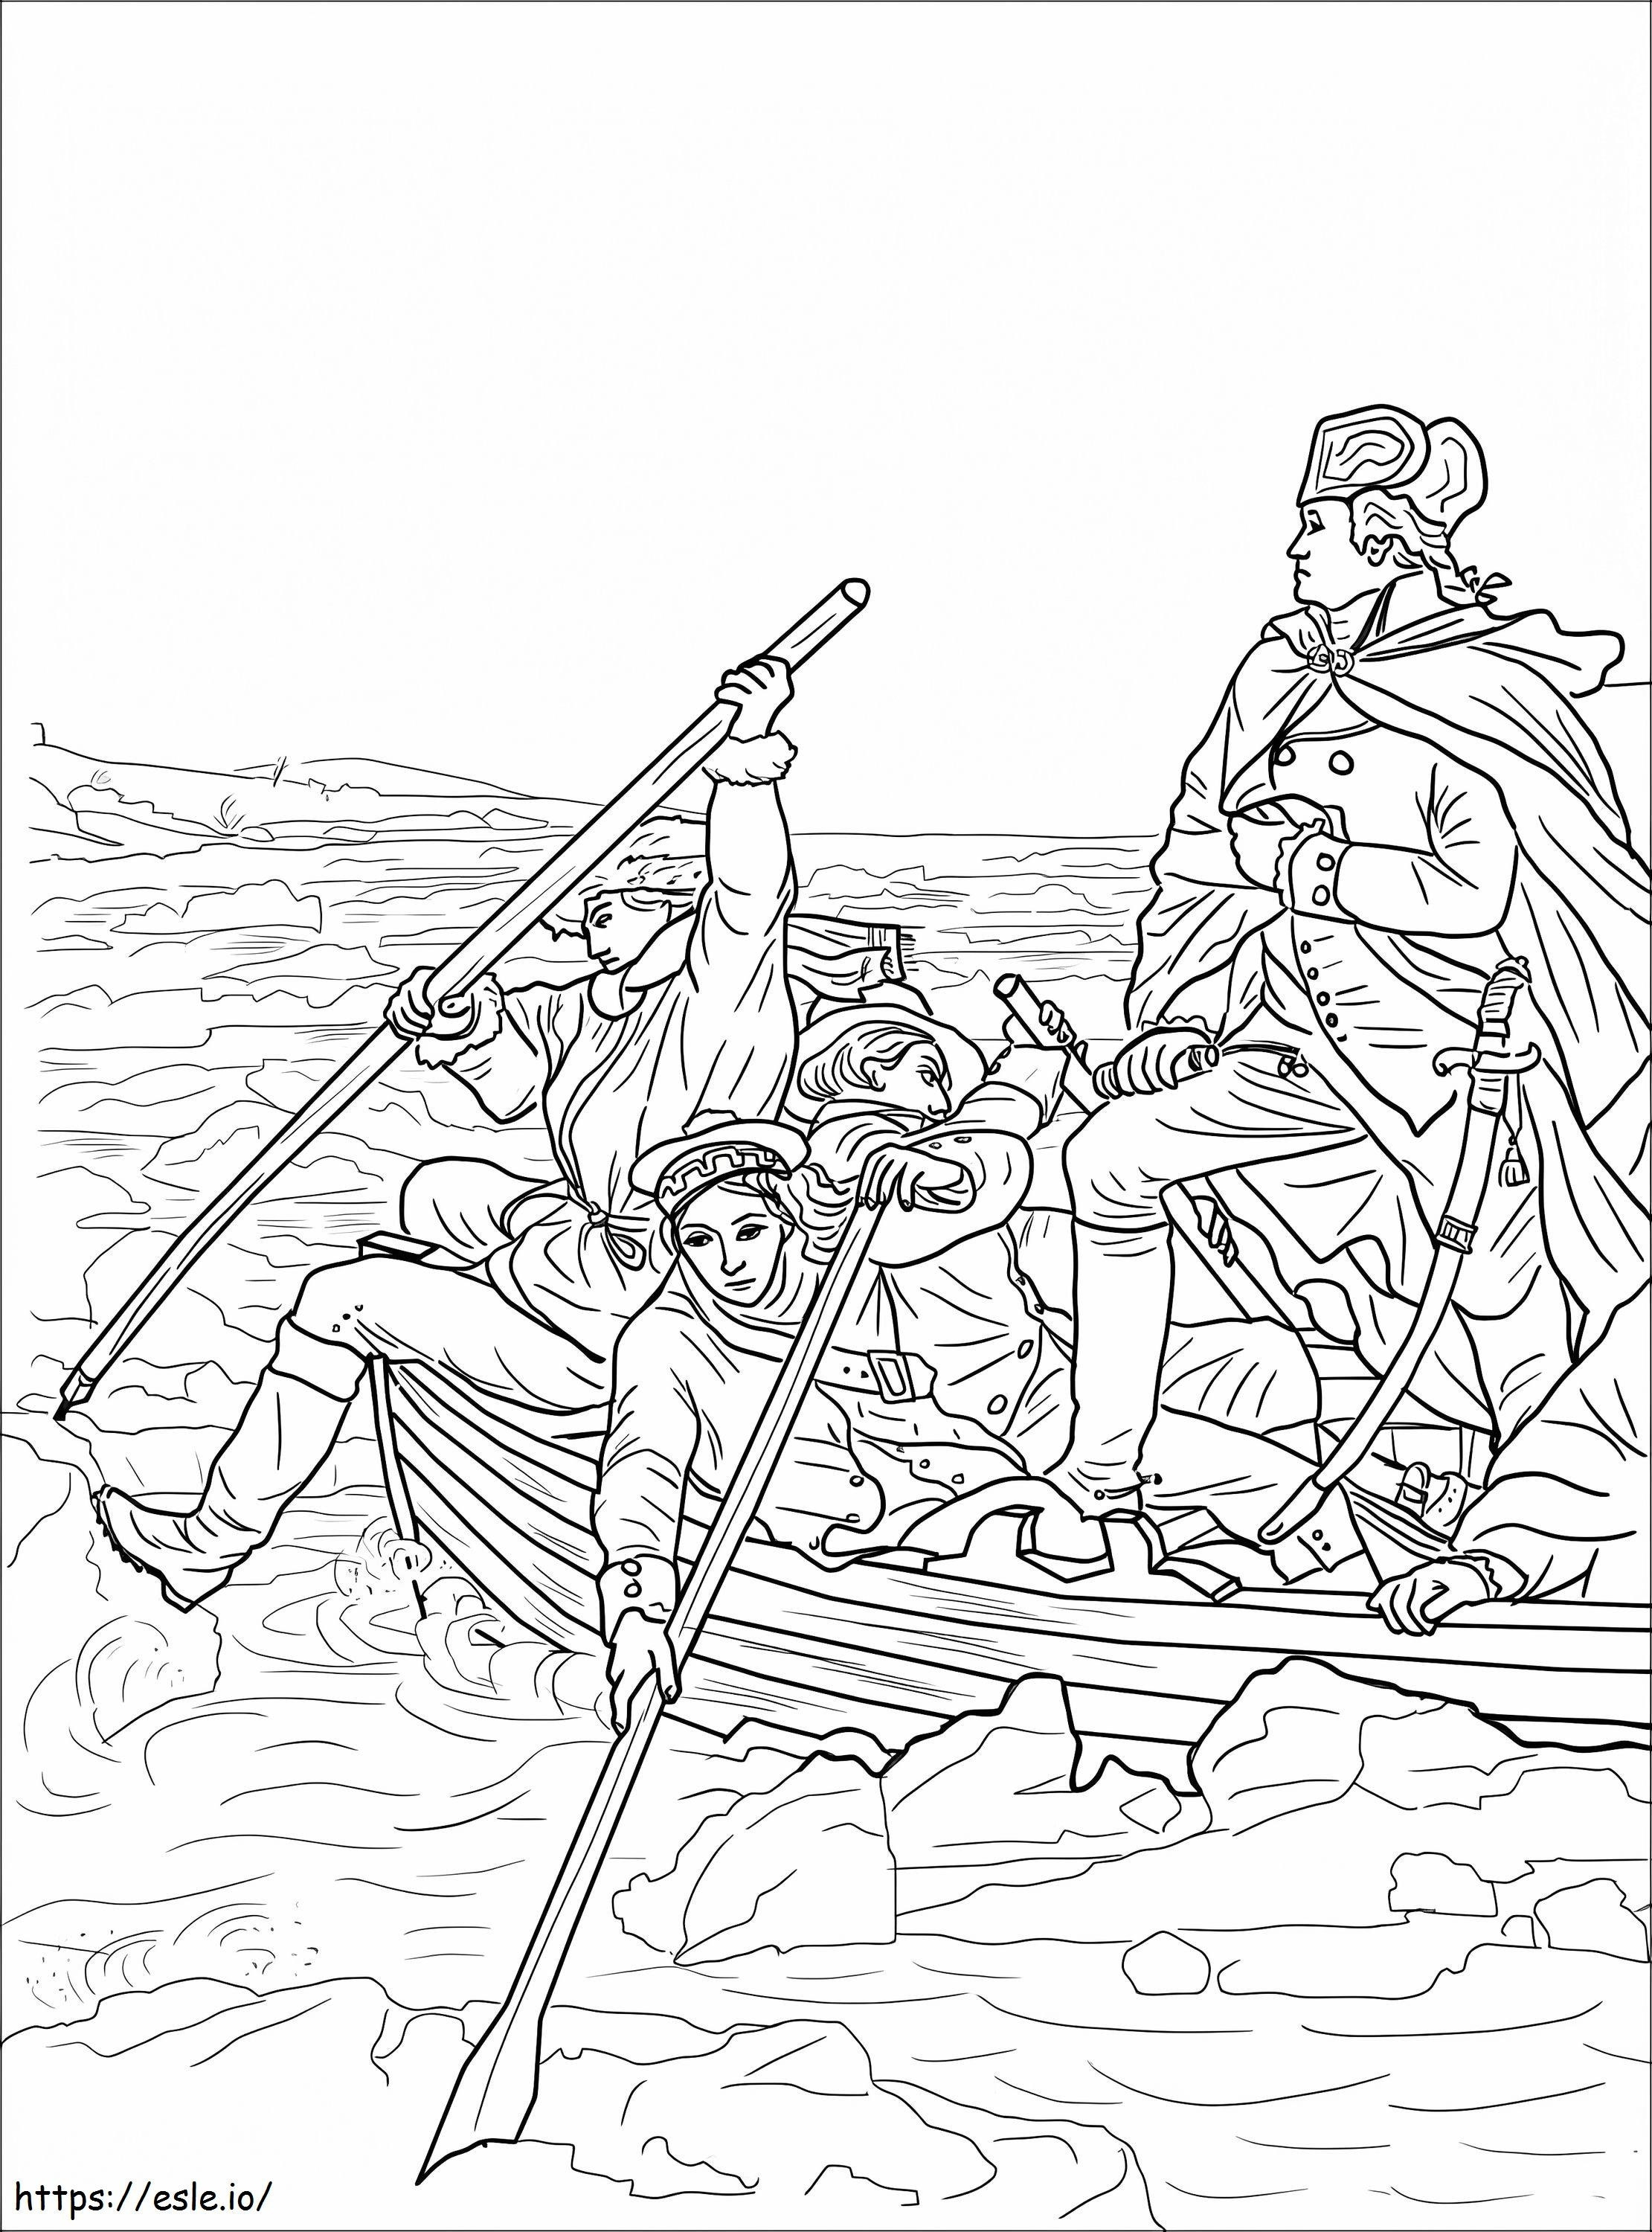 George Washington Crossing The Delaware coloring page